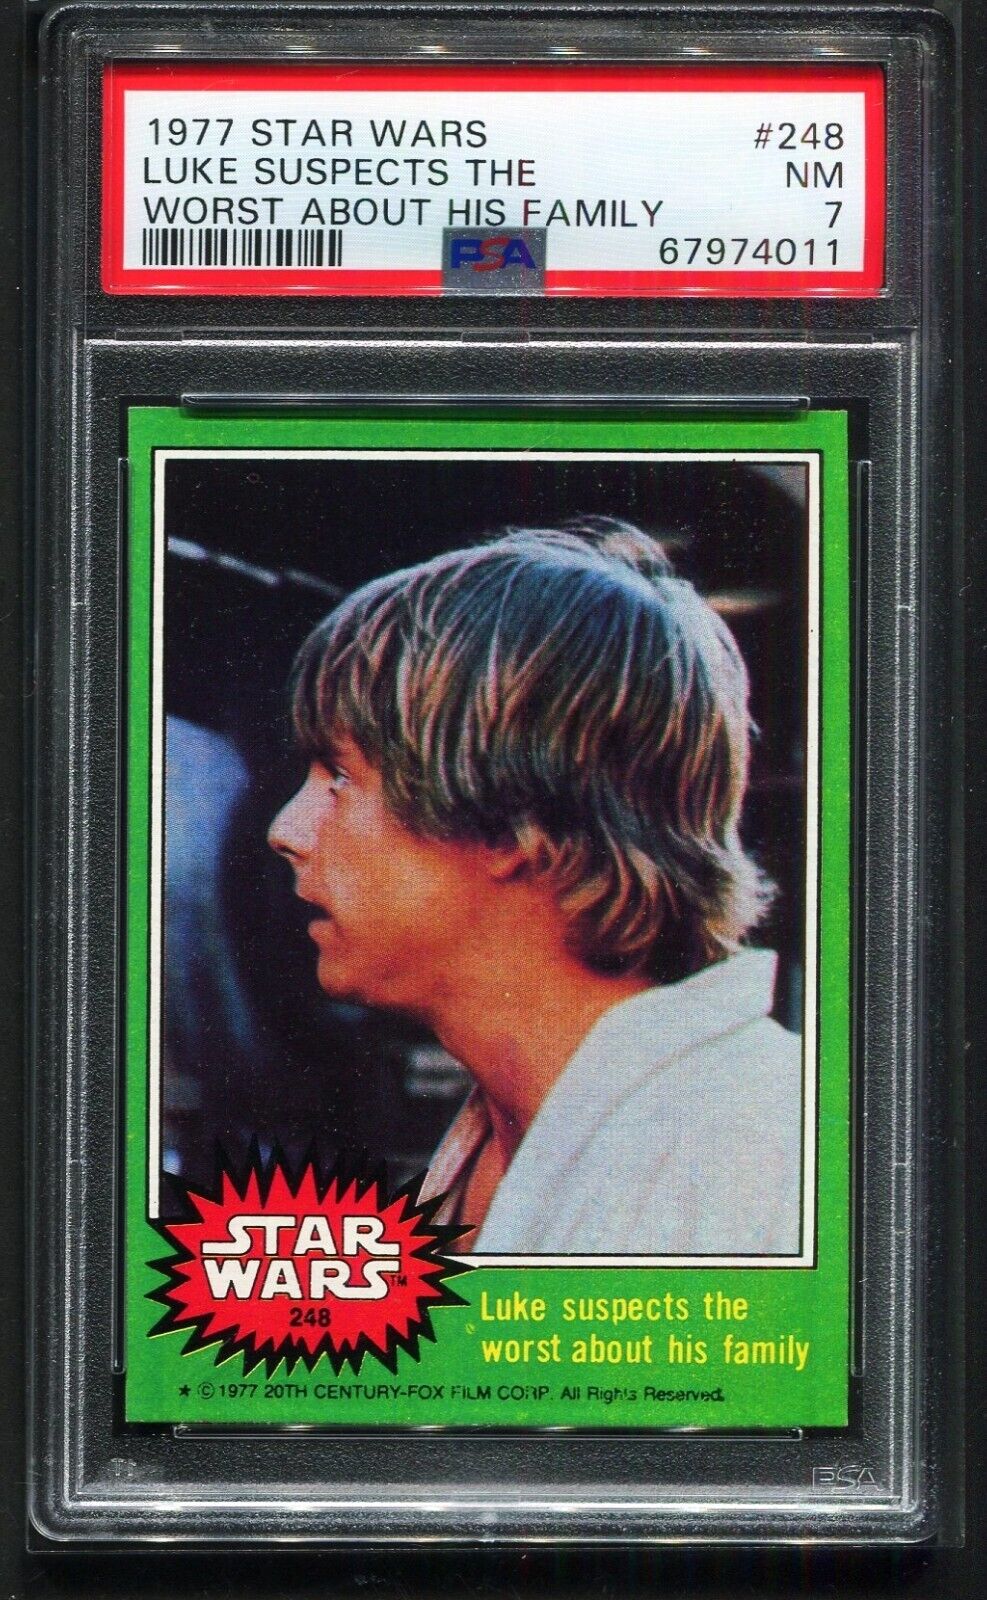 PSA 1977 Star Wars #248 LUKE SUSPECTS THE WORST ABOUT HIS FAMILY PSA 7 NM